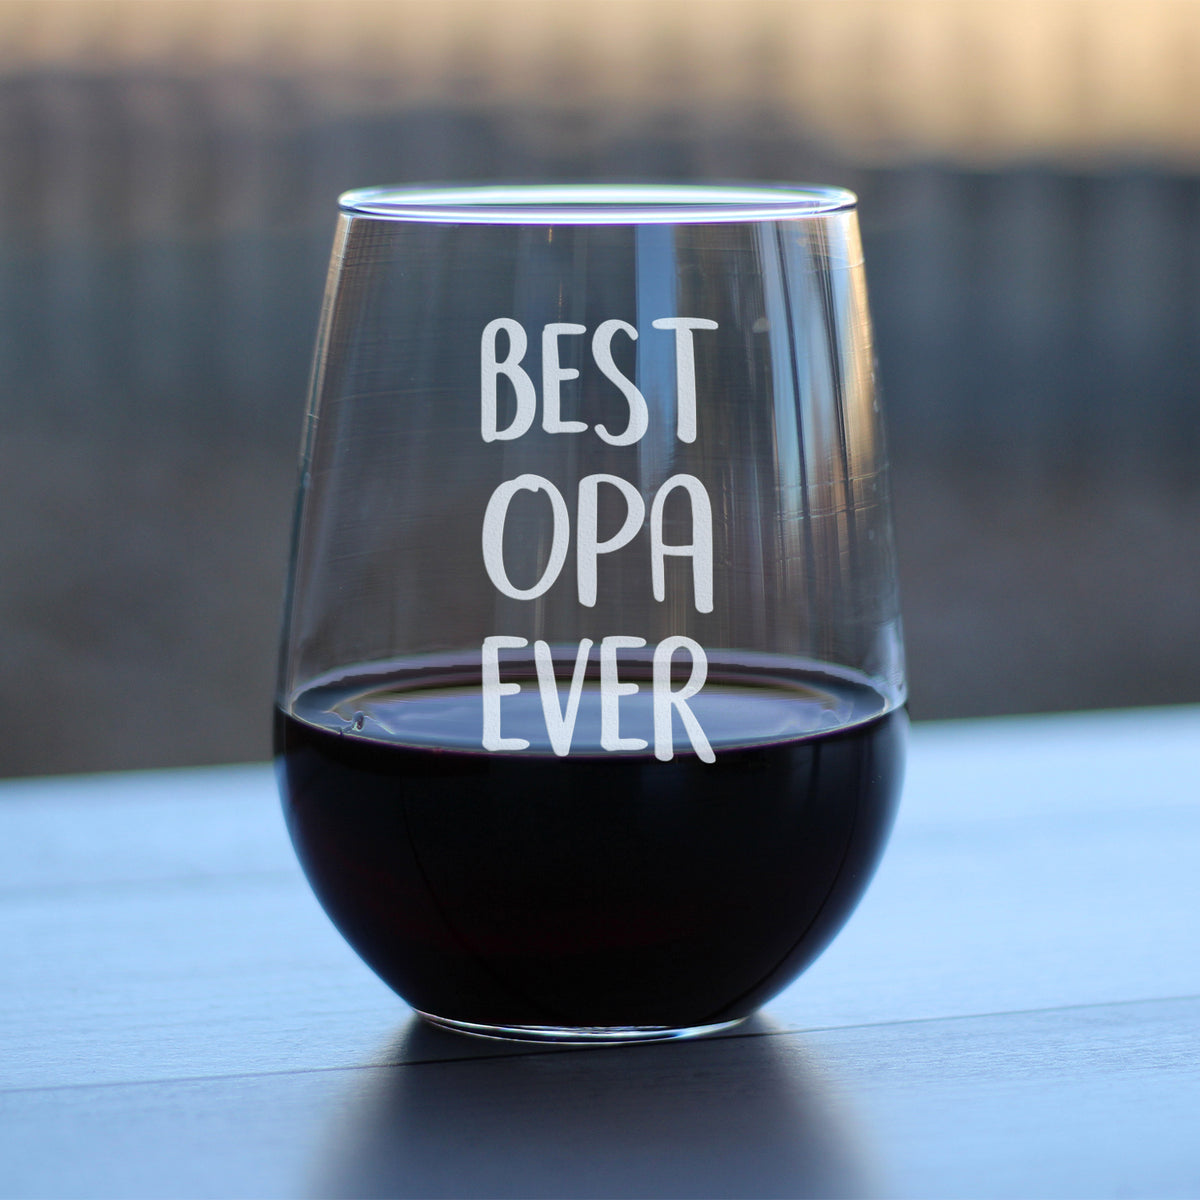 Best Opa Ever - Cute Funny Stemless Wine Glass, Large 17 Ounce Size, Etched Sayings, Father&#39;s Day or Birthday Gift for Grandpa